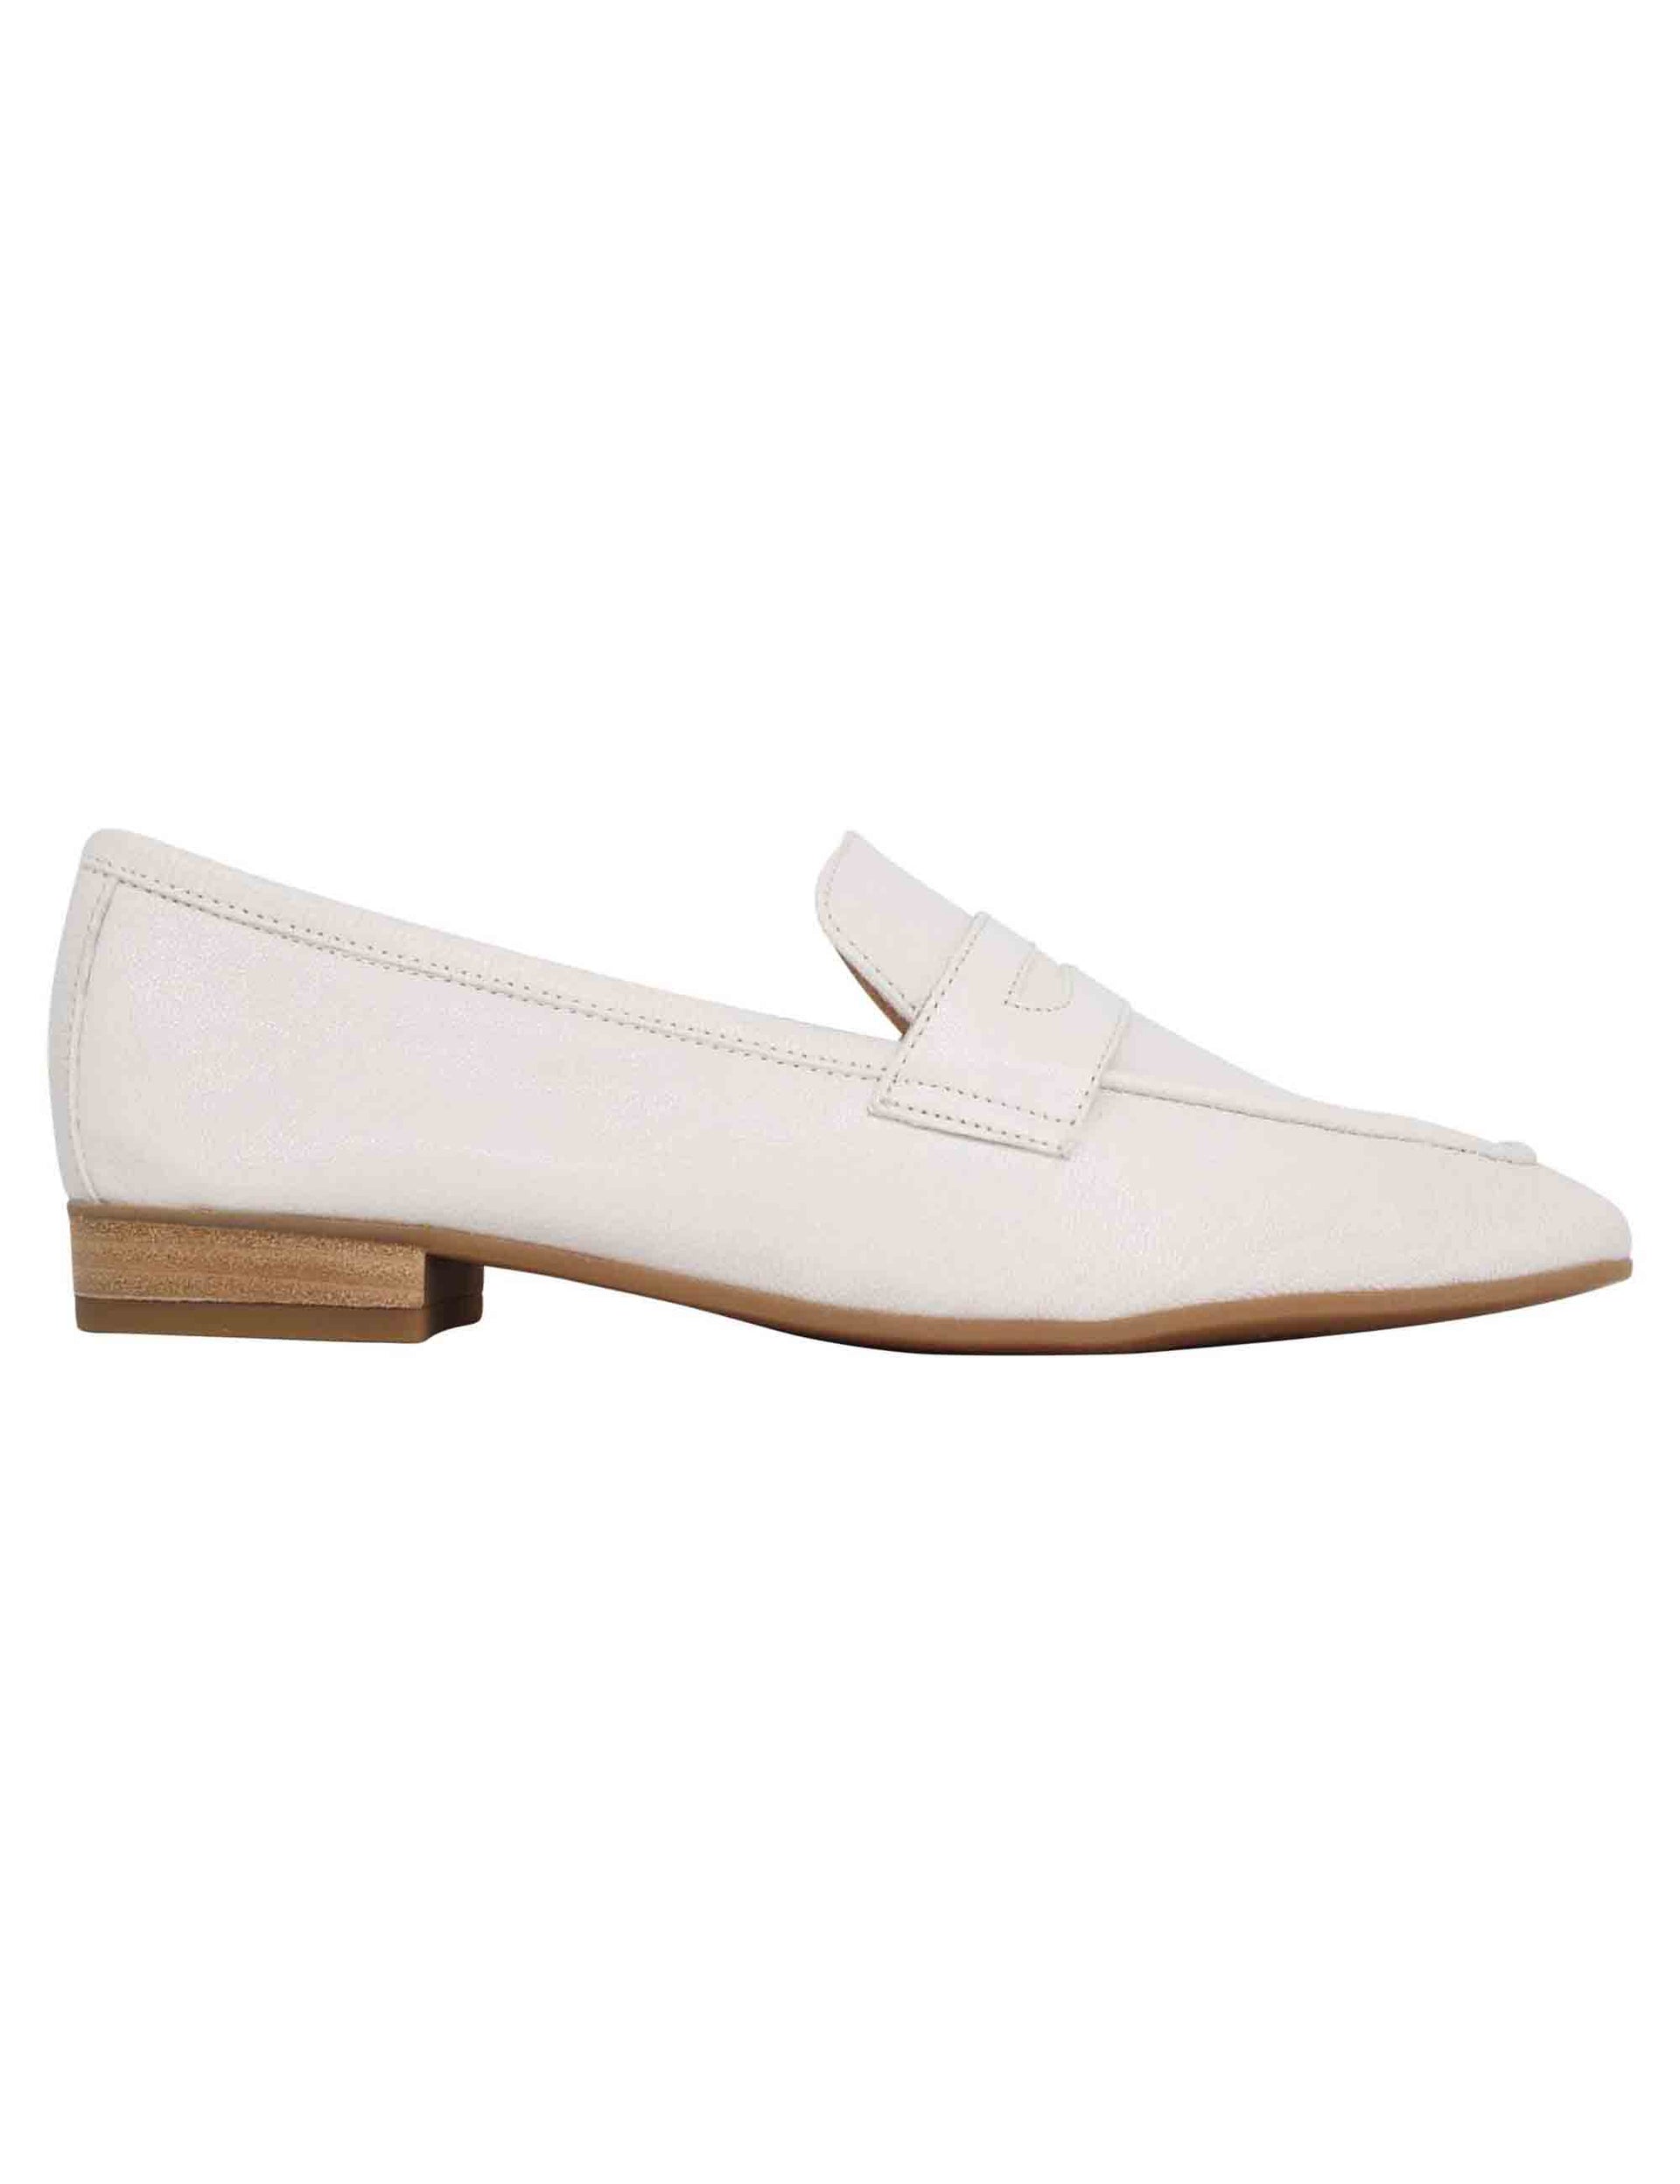 Women's ivory unlined leather loafers